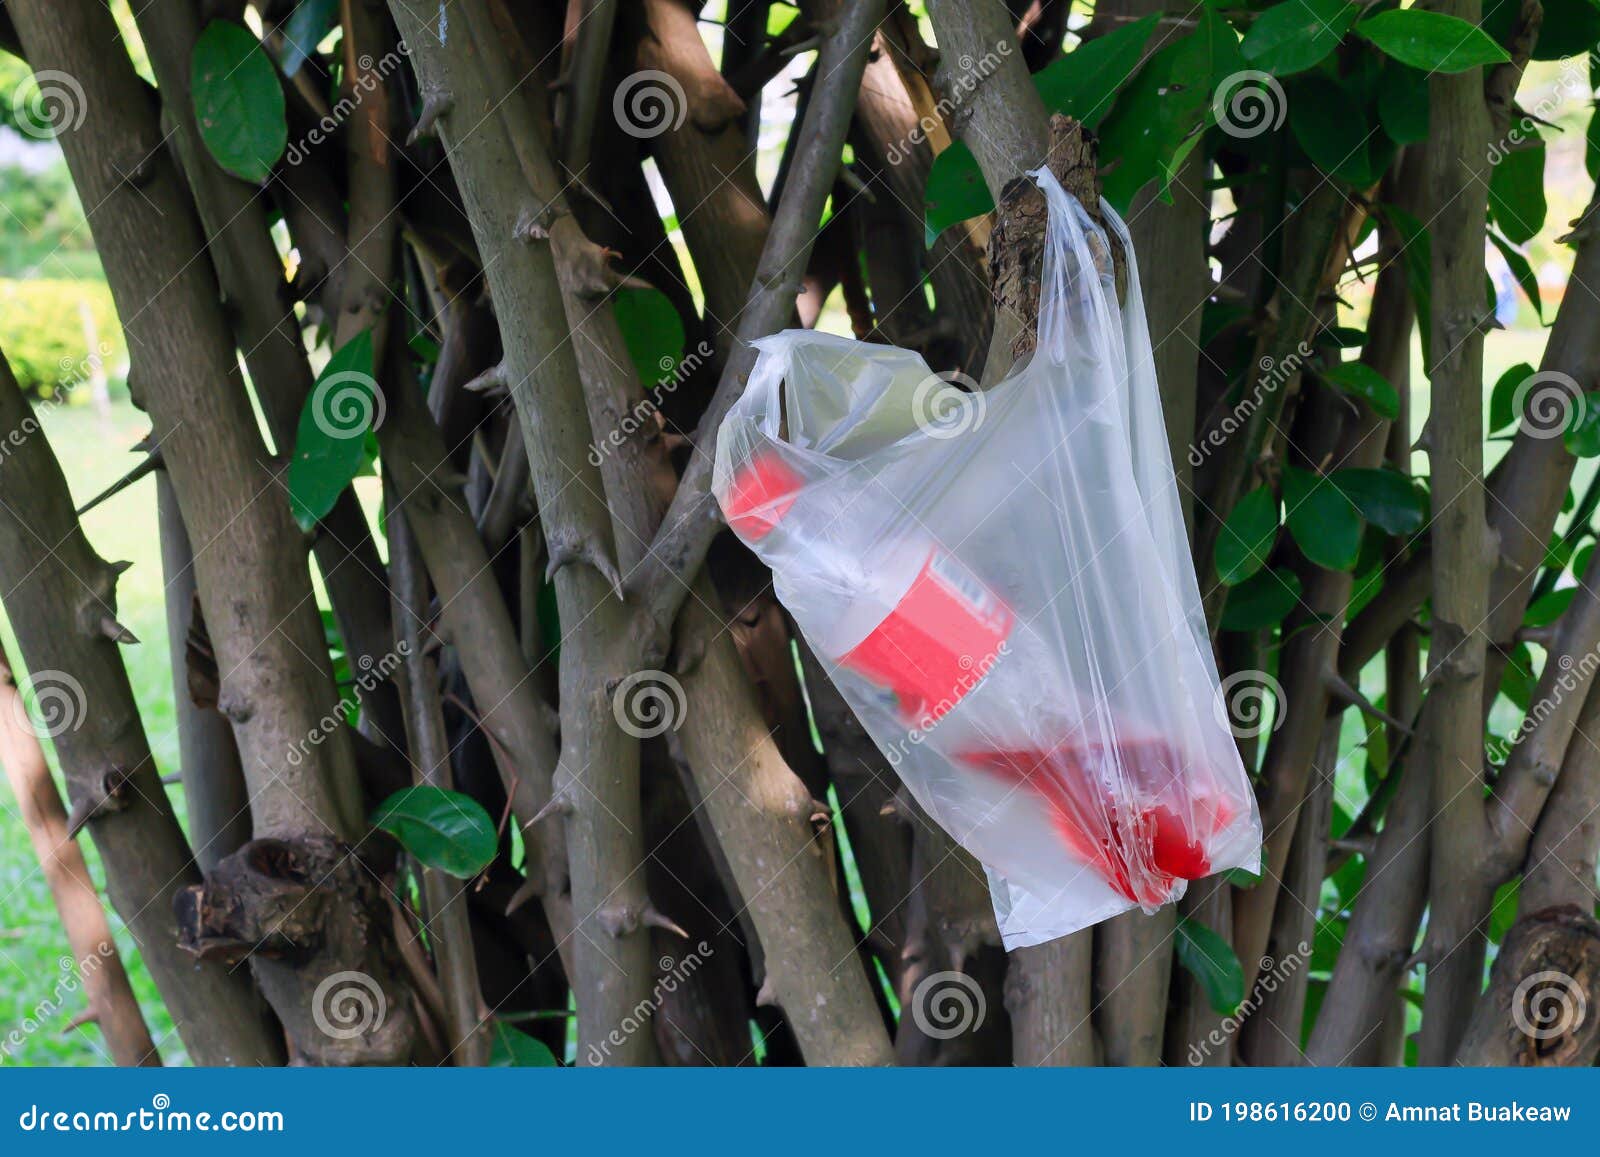 https://thumbs.dreamstime.com/z/plastic-garbage-bags-hanging-tree-plastic-waste-pollution-plastic-garbage-bags-hanging-tree-plastic-waste-198616200.jpg